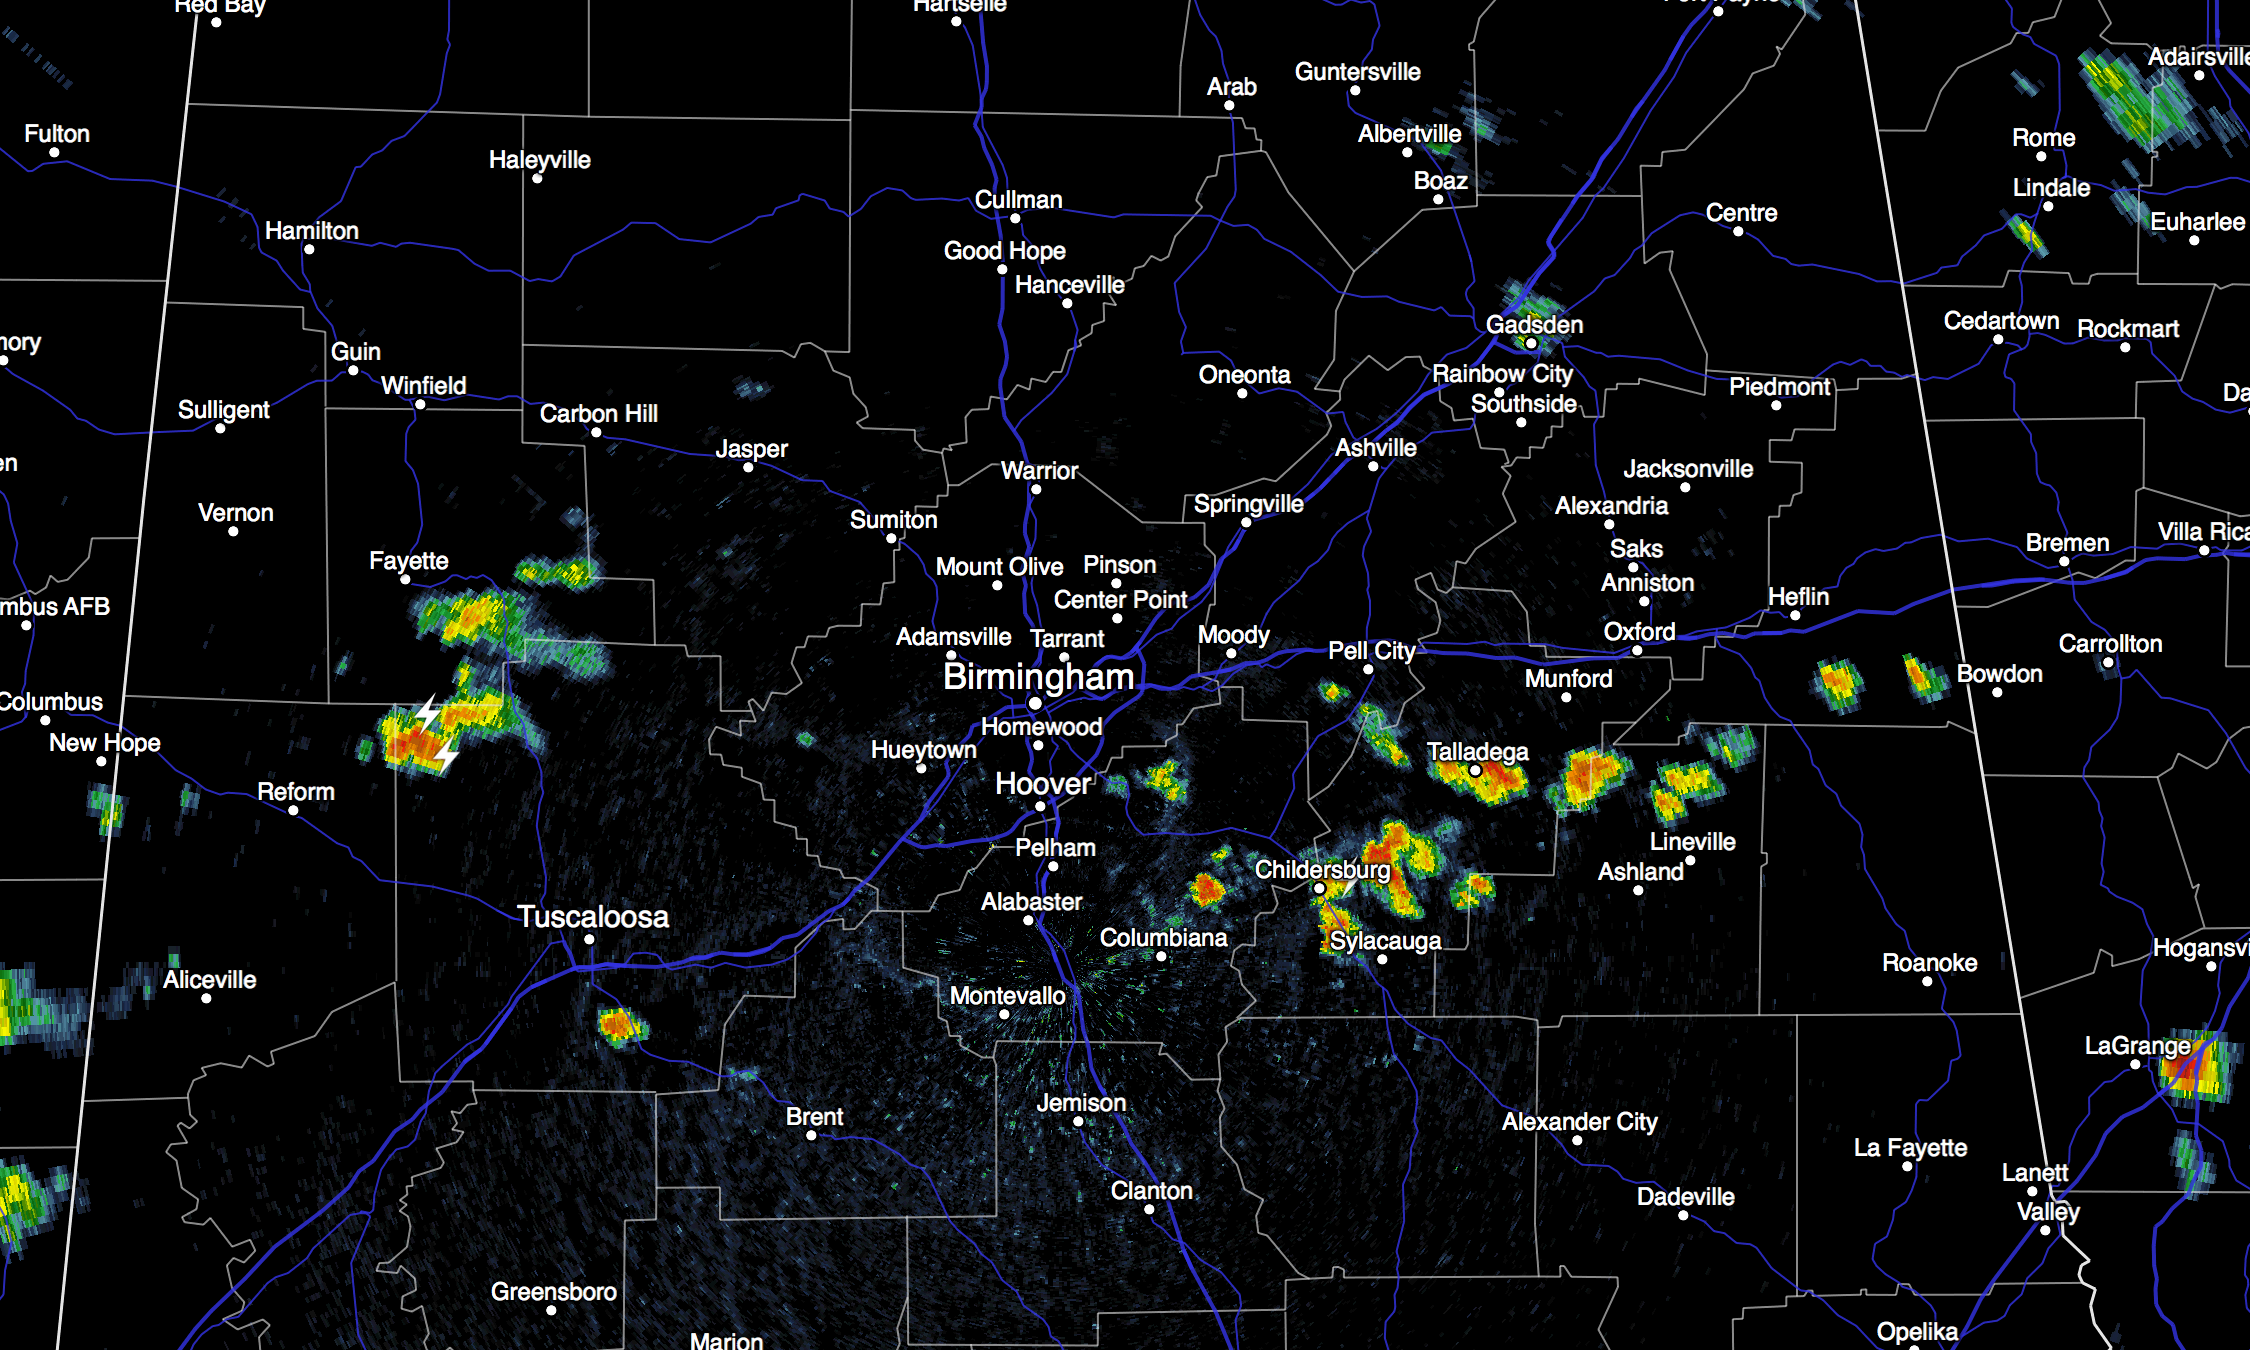 Showers/Storms Forming Across Alabama